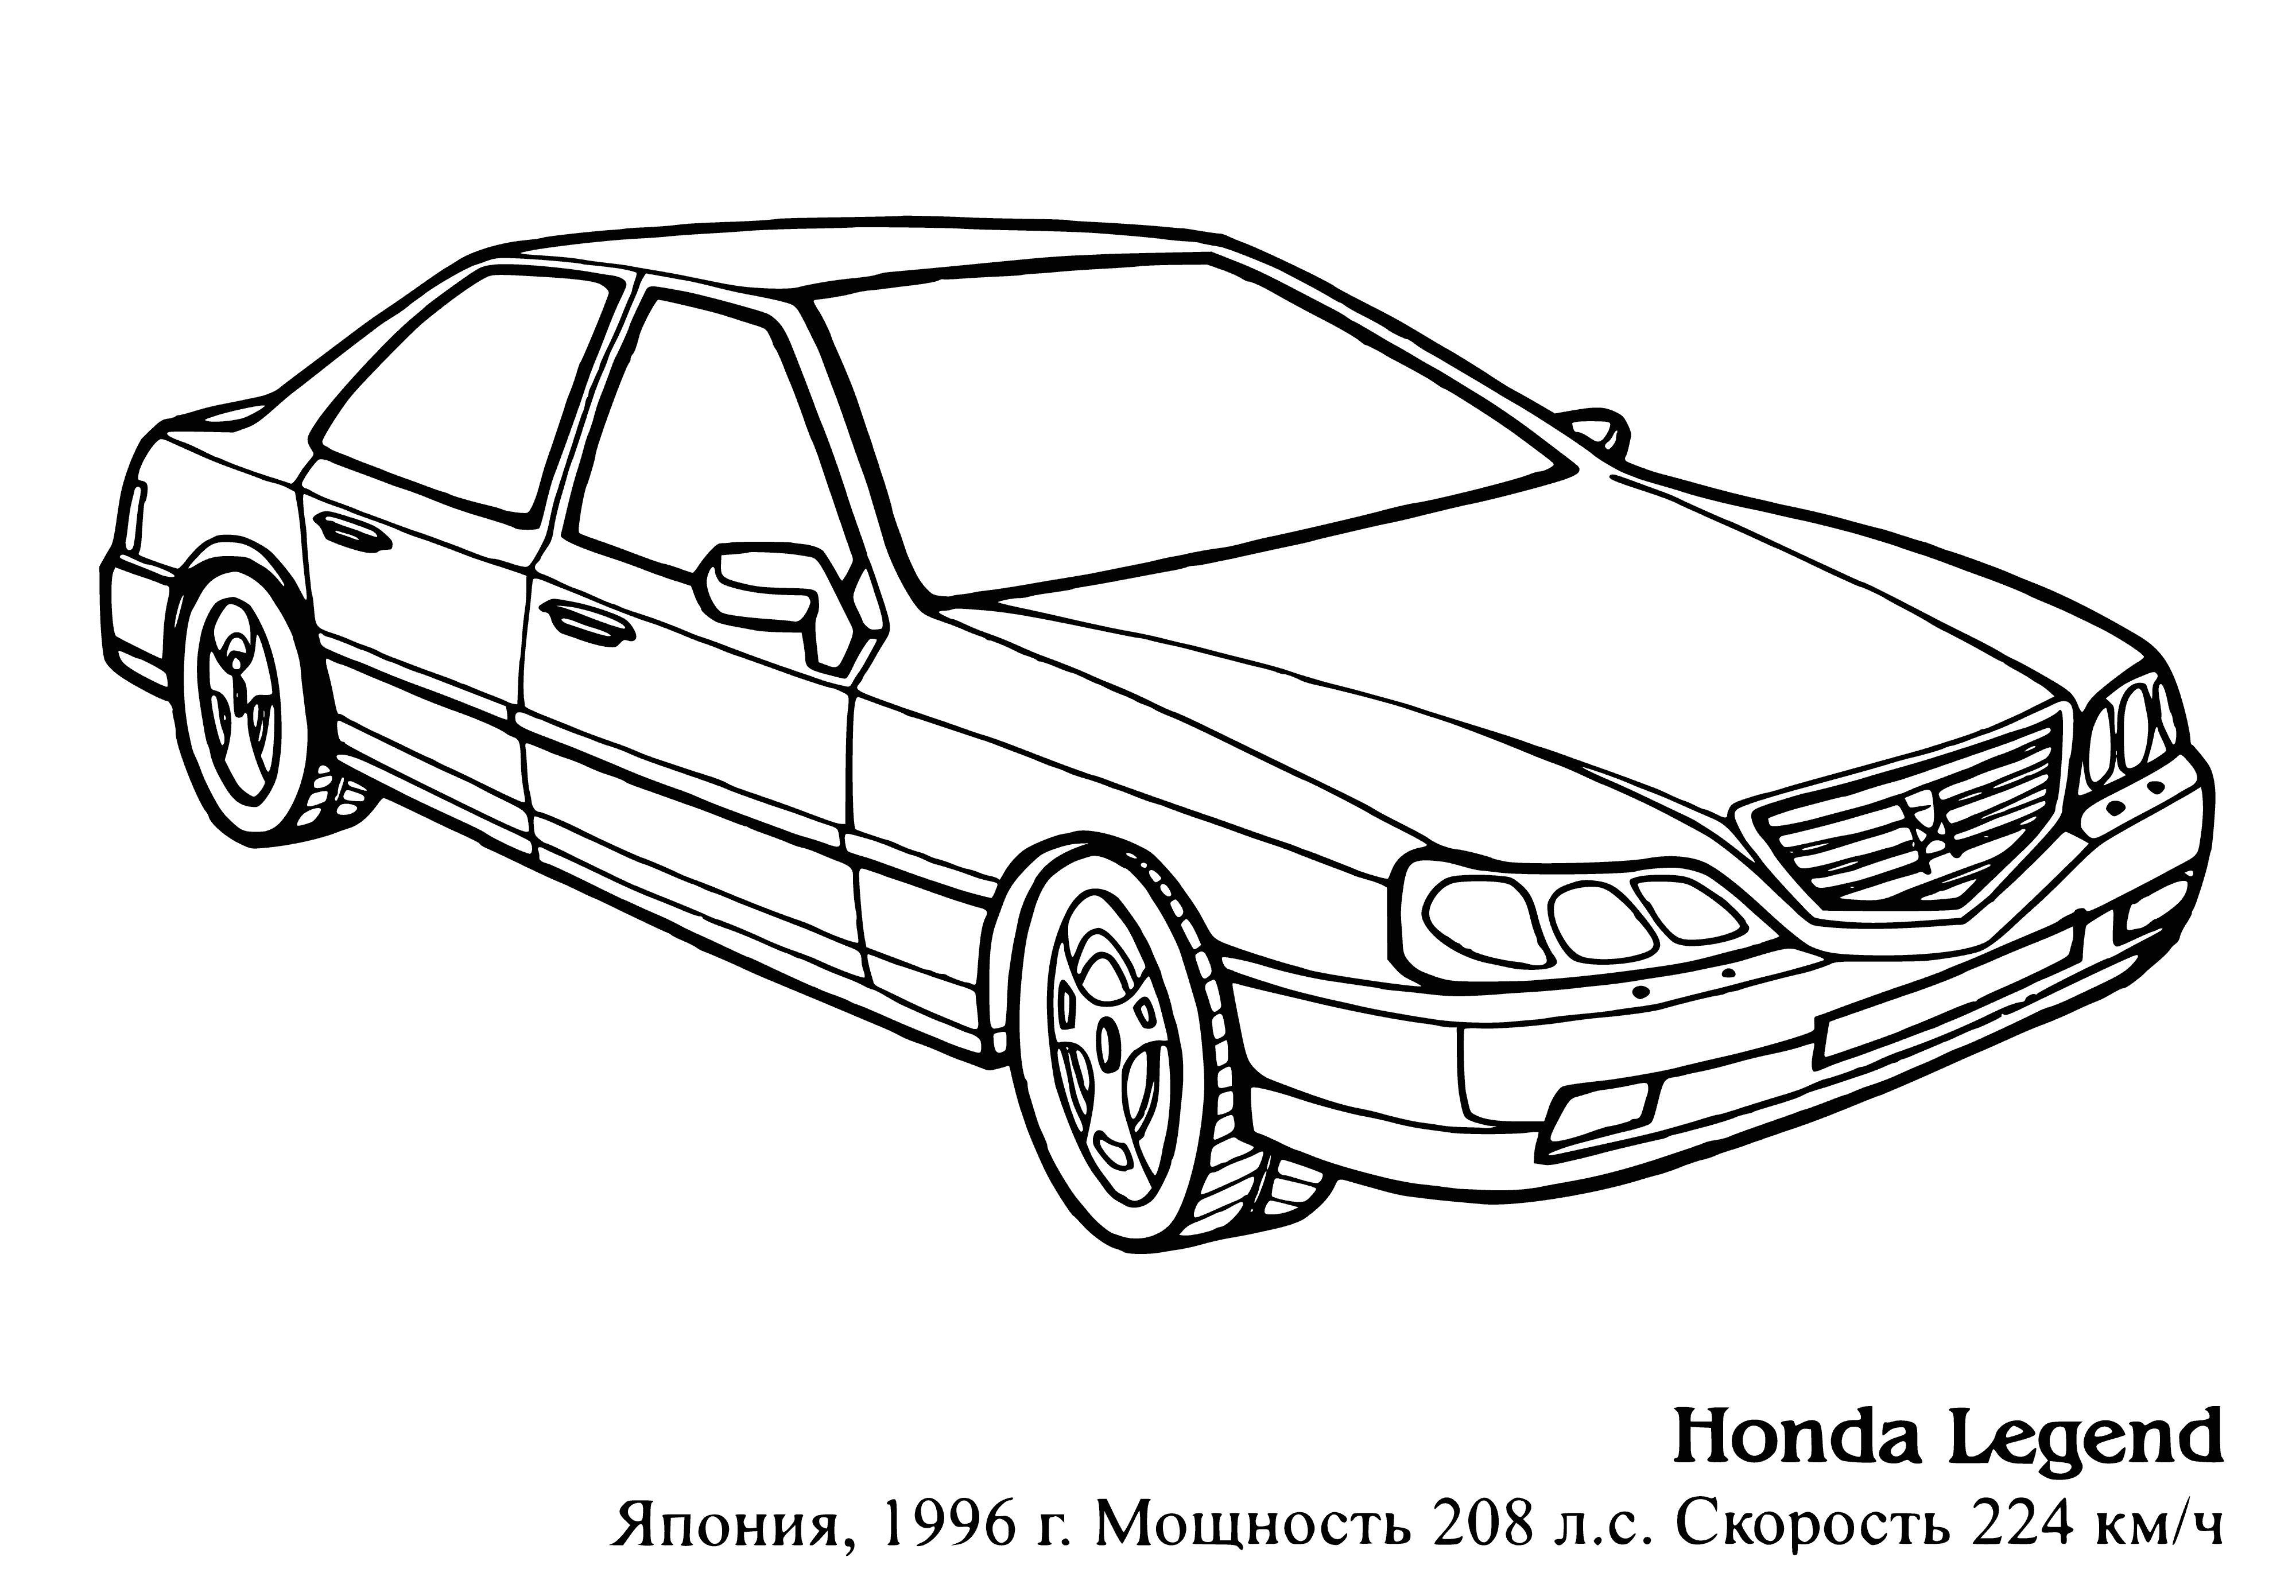 coloring page: Coloring page of a black HondaLegend parked on a road near calm water and a boat. Four doors and tinted windows.